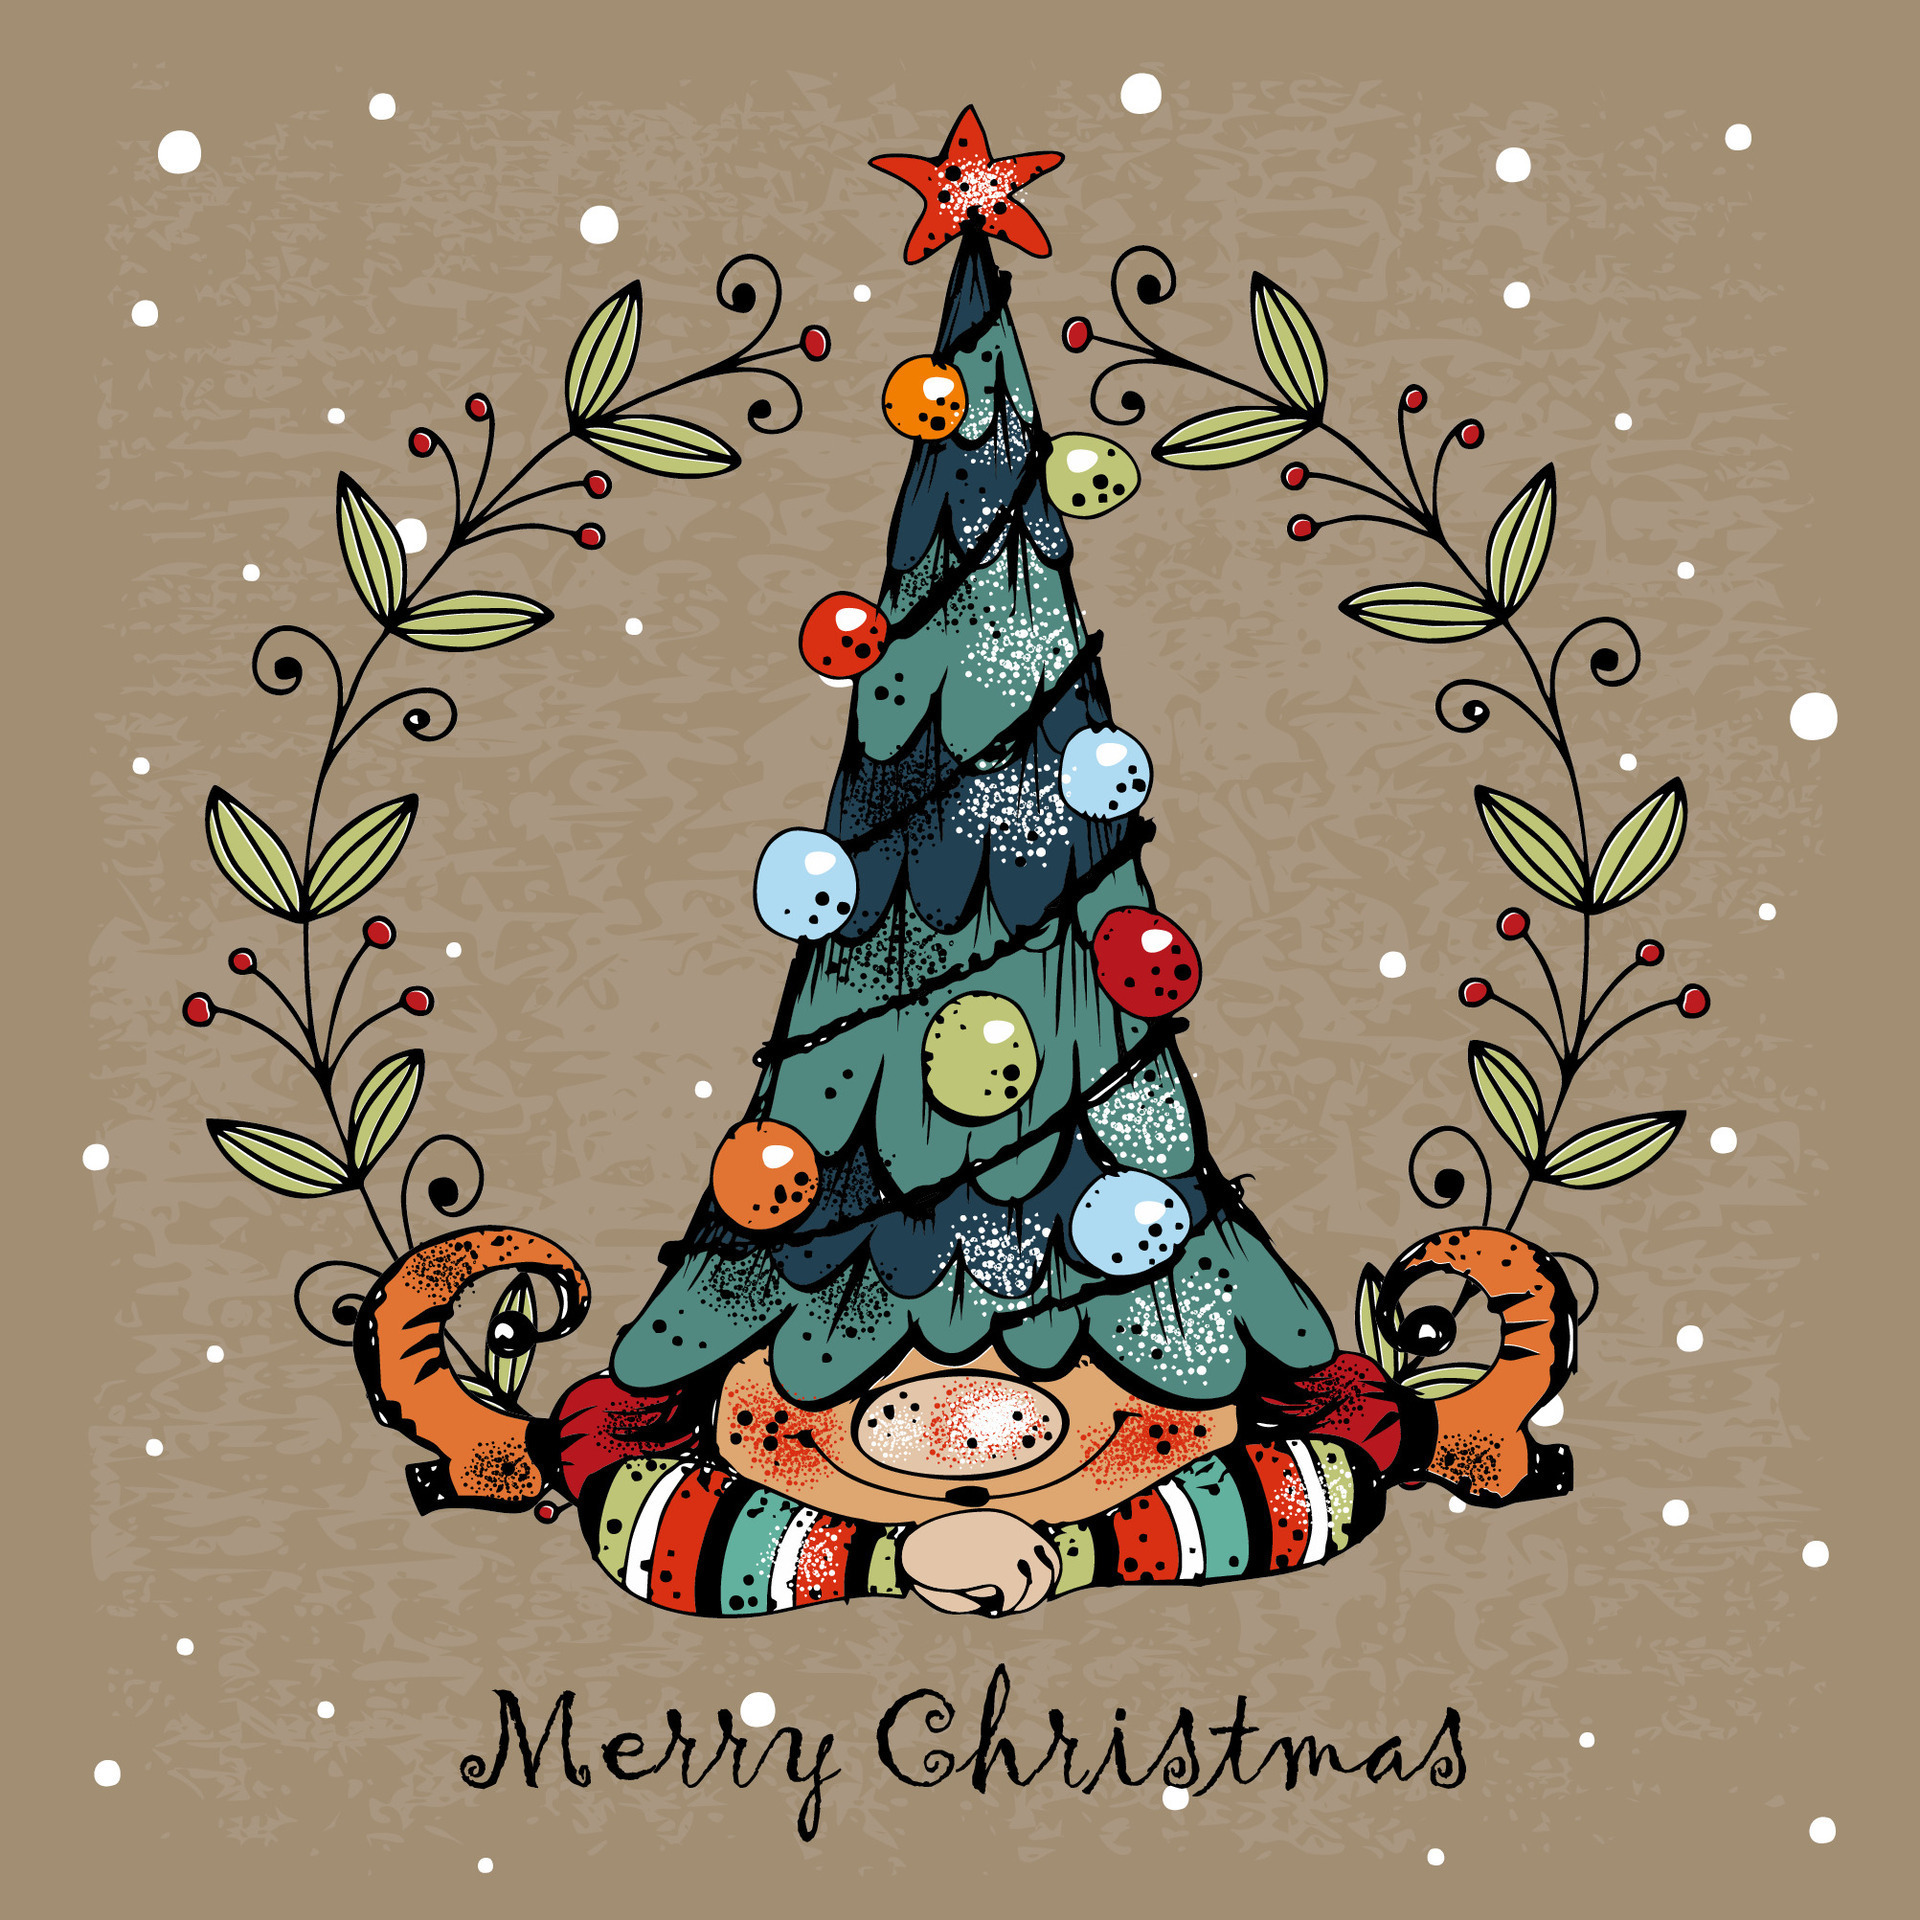 Merry Christmas greeting card. Cute Christmas gnome with gifts in